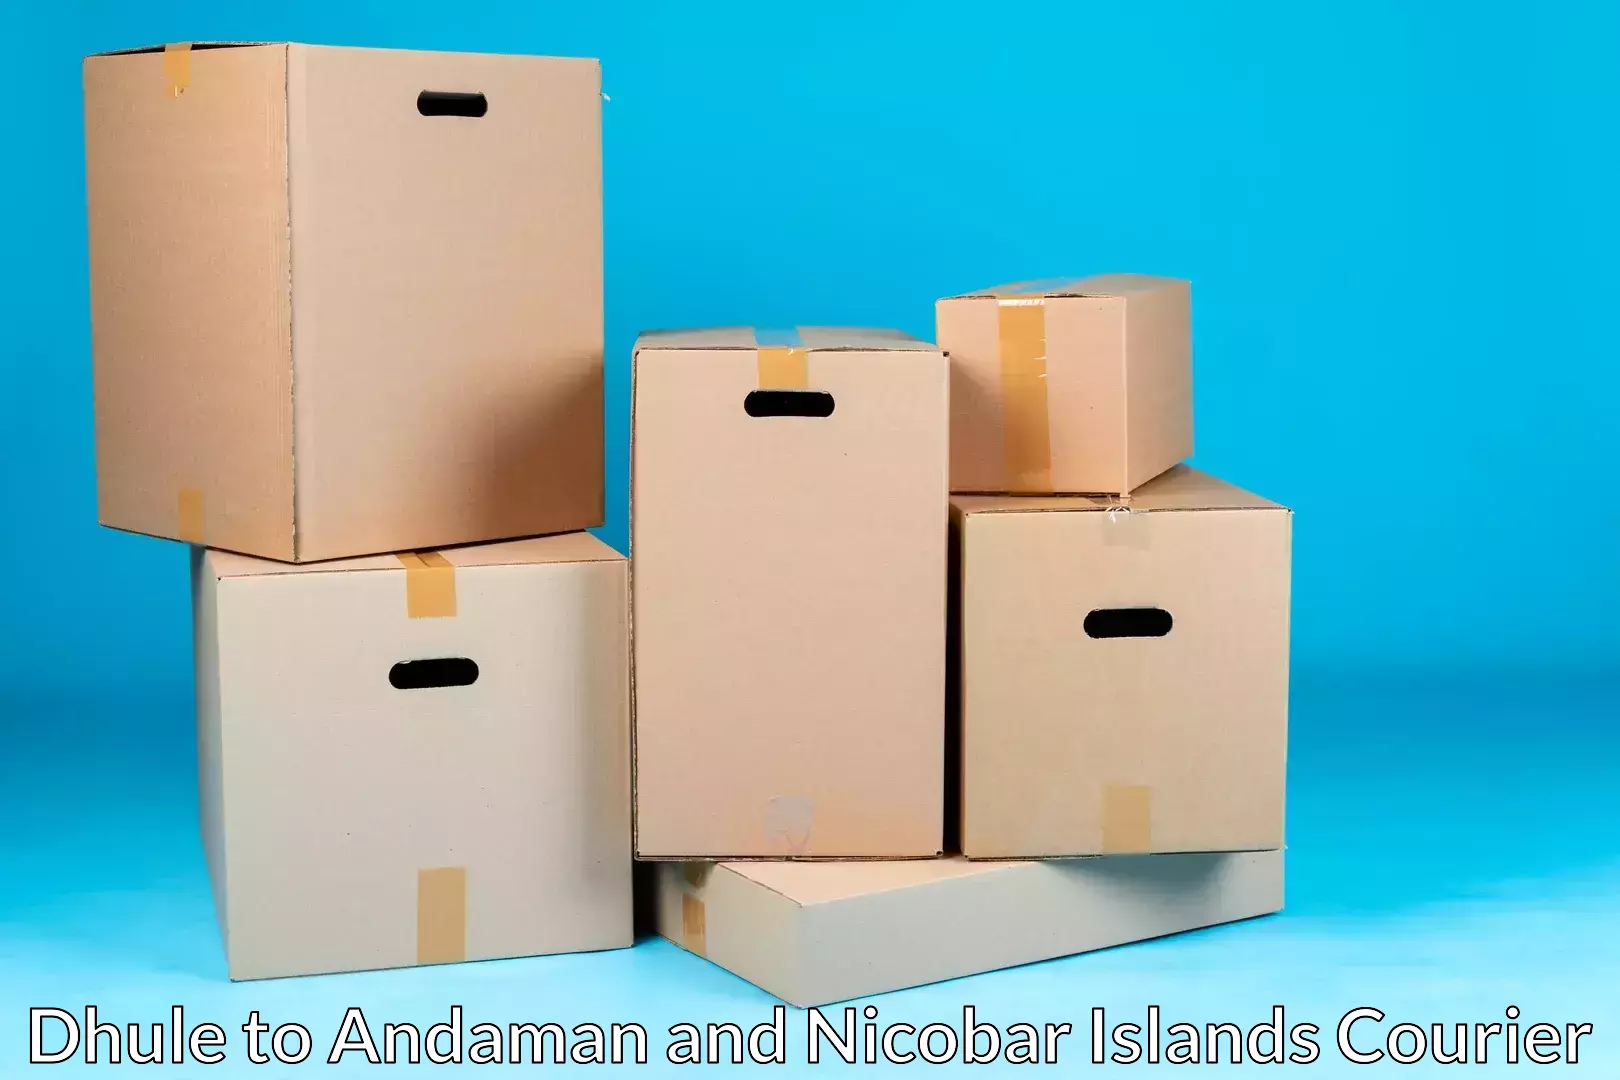 Quality moving company Dhule to Andaman and Nicobar Islands